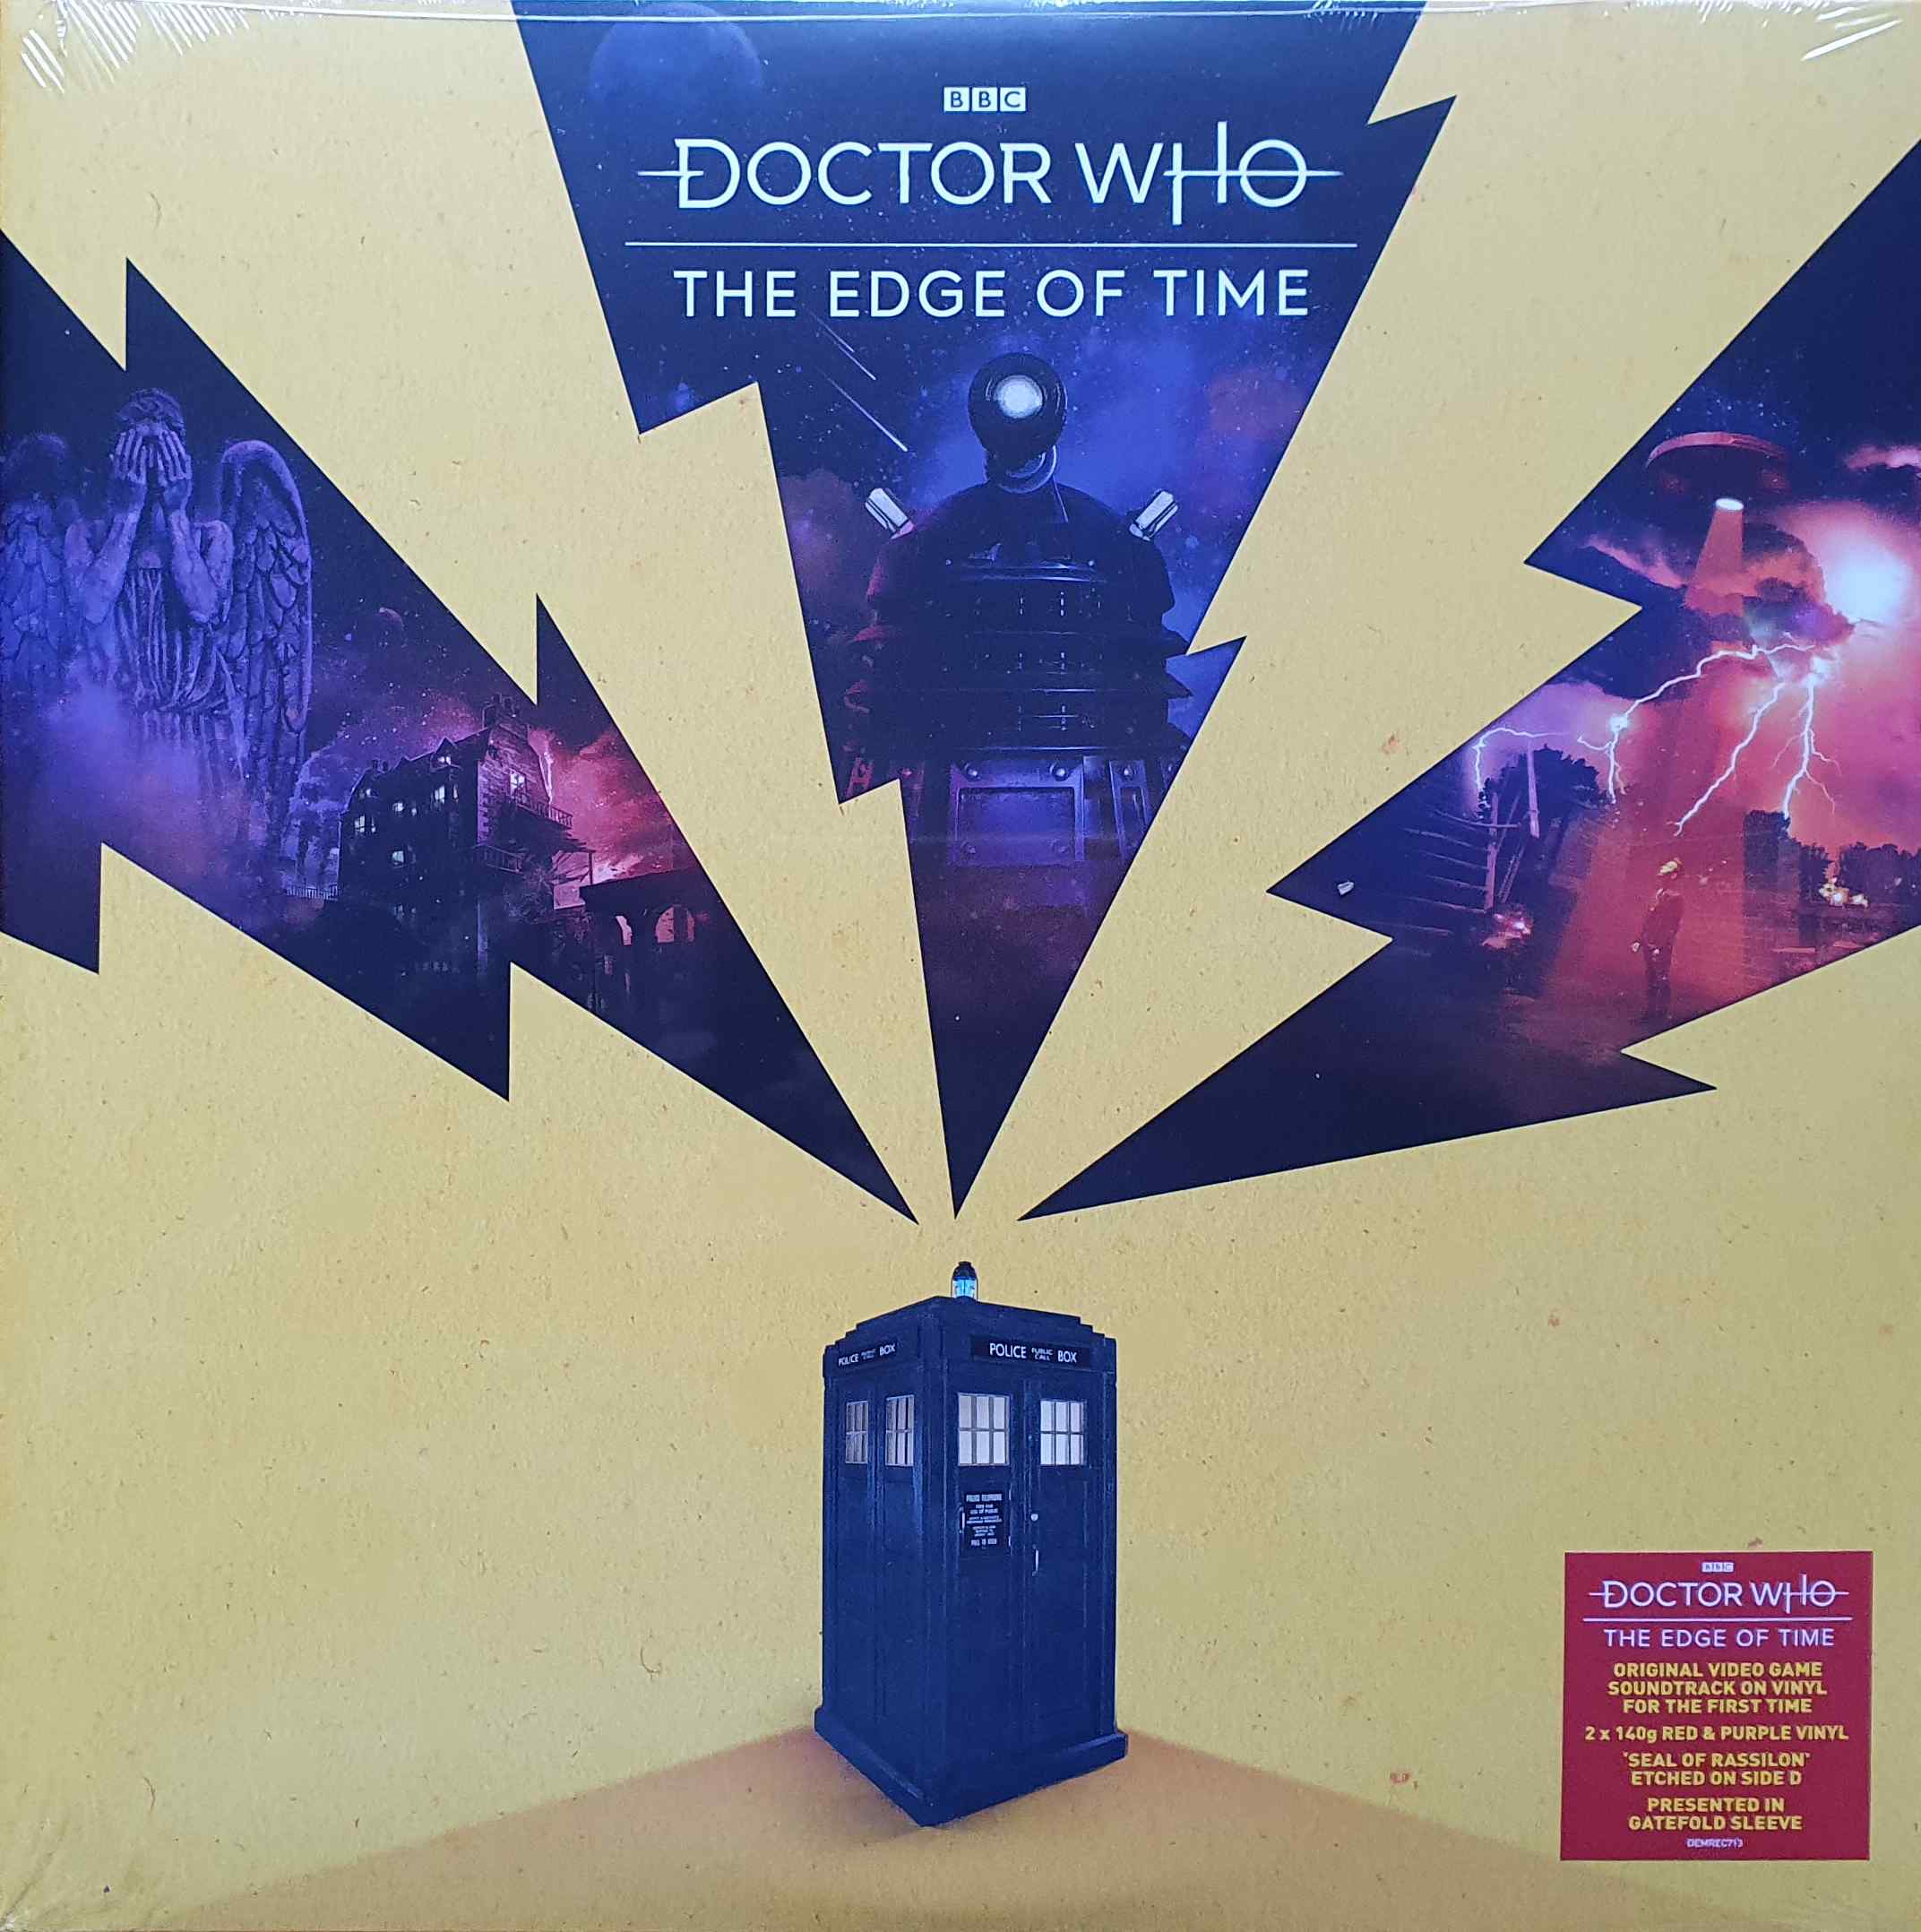 Picture of DEMREC 713 Doctor Who - The edge of time by artist Richard Wilkinson from the BBC records and Tapes library